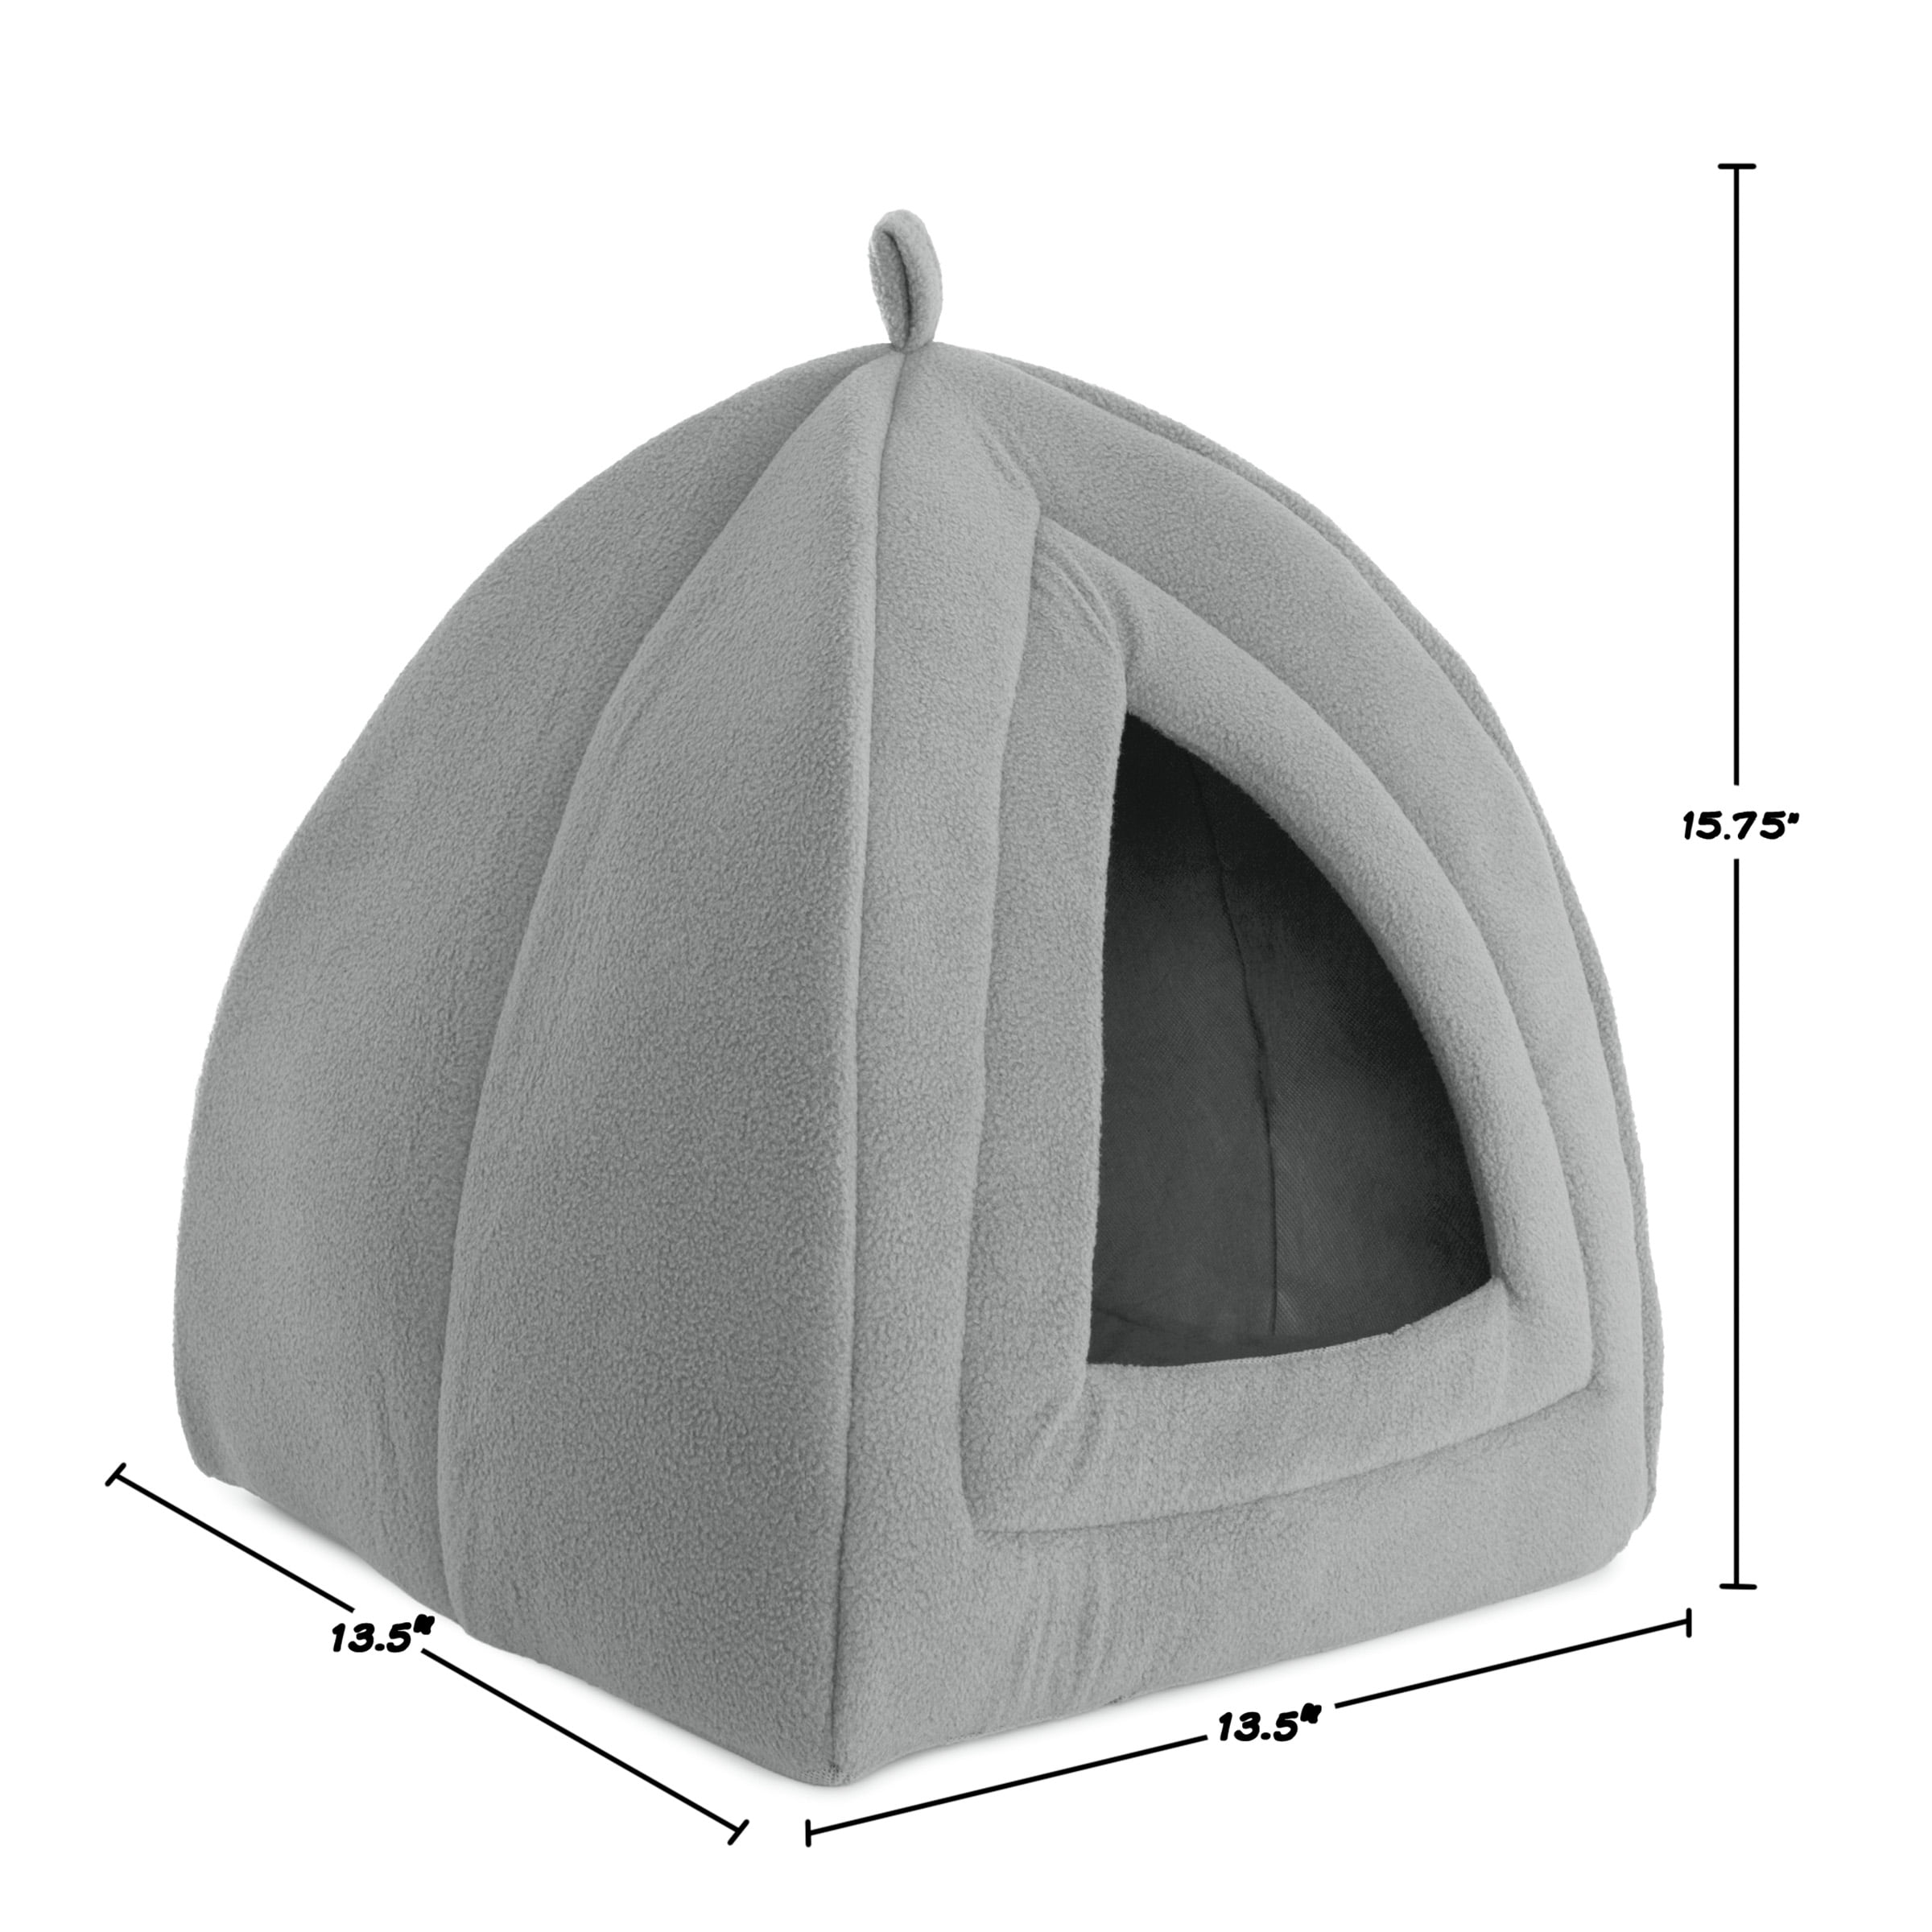 Cat House - Indoor Bed with Removable Foam Cushion - Pet Tent for Puppies, Rabbits, Guinea Pigs, Hedgehogs, and Other Small Animals by PETMAKER (Gray)